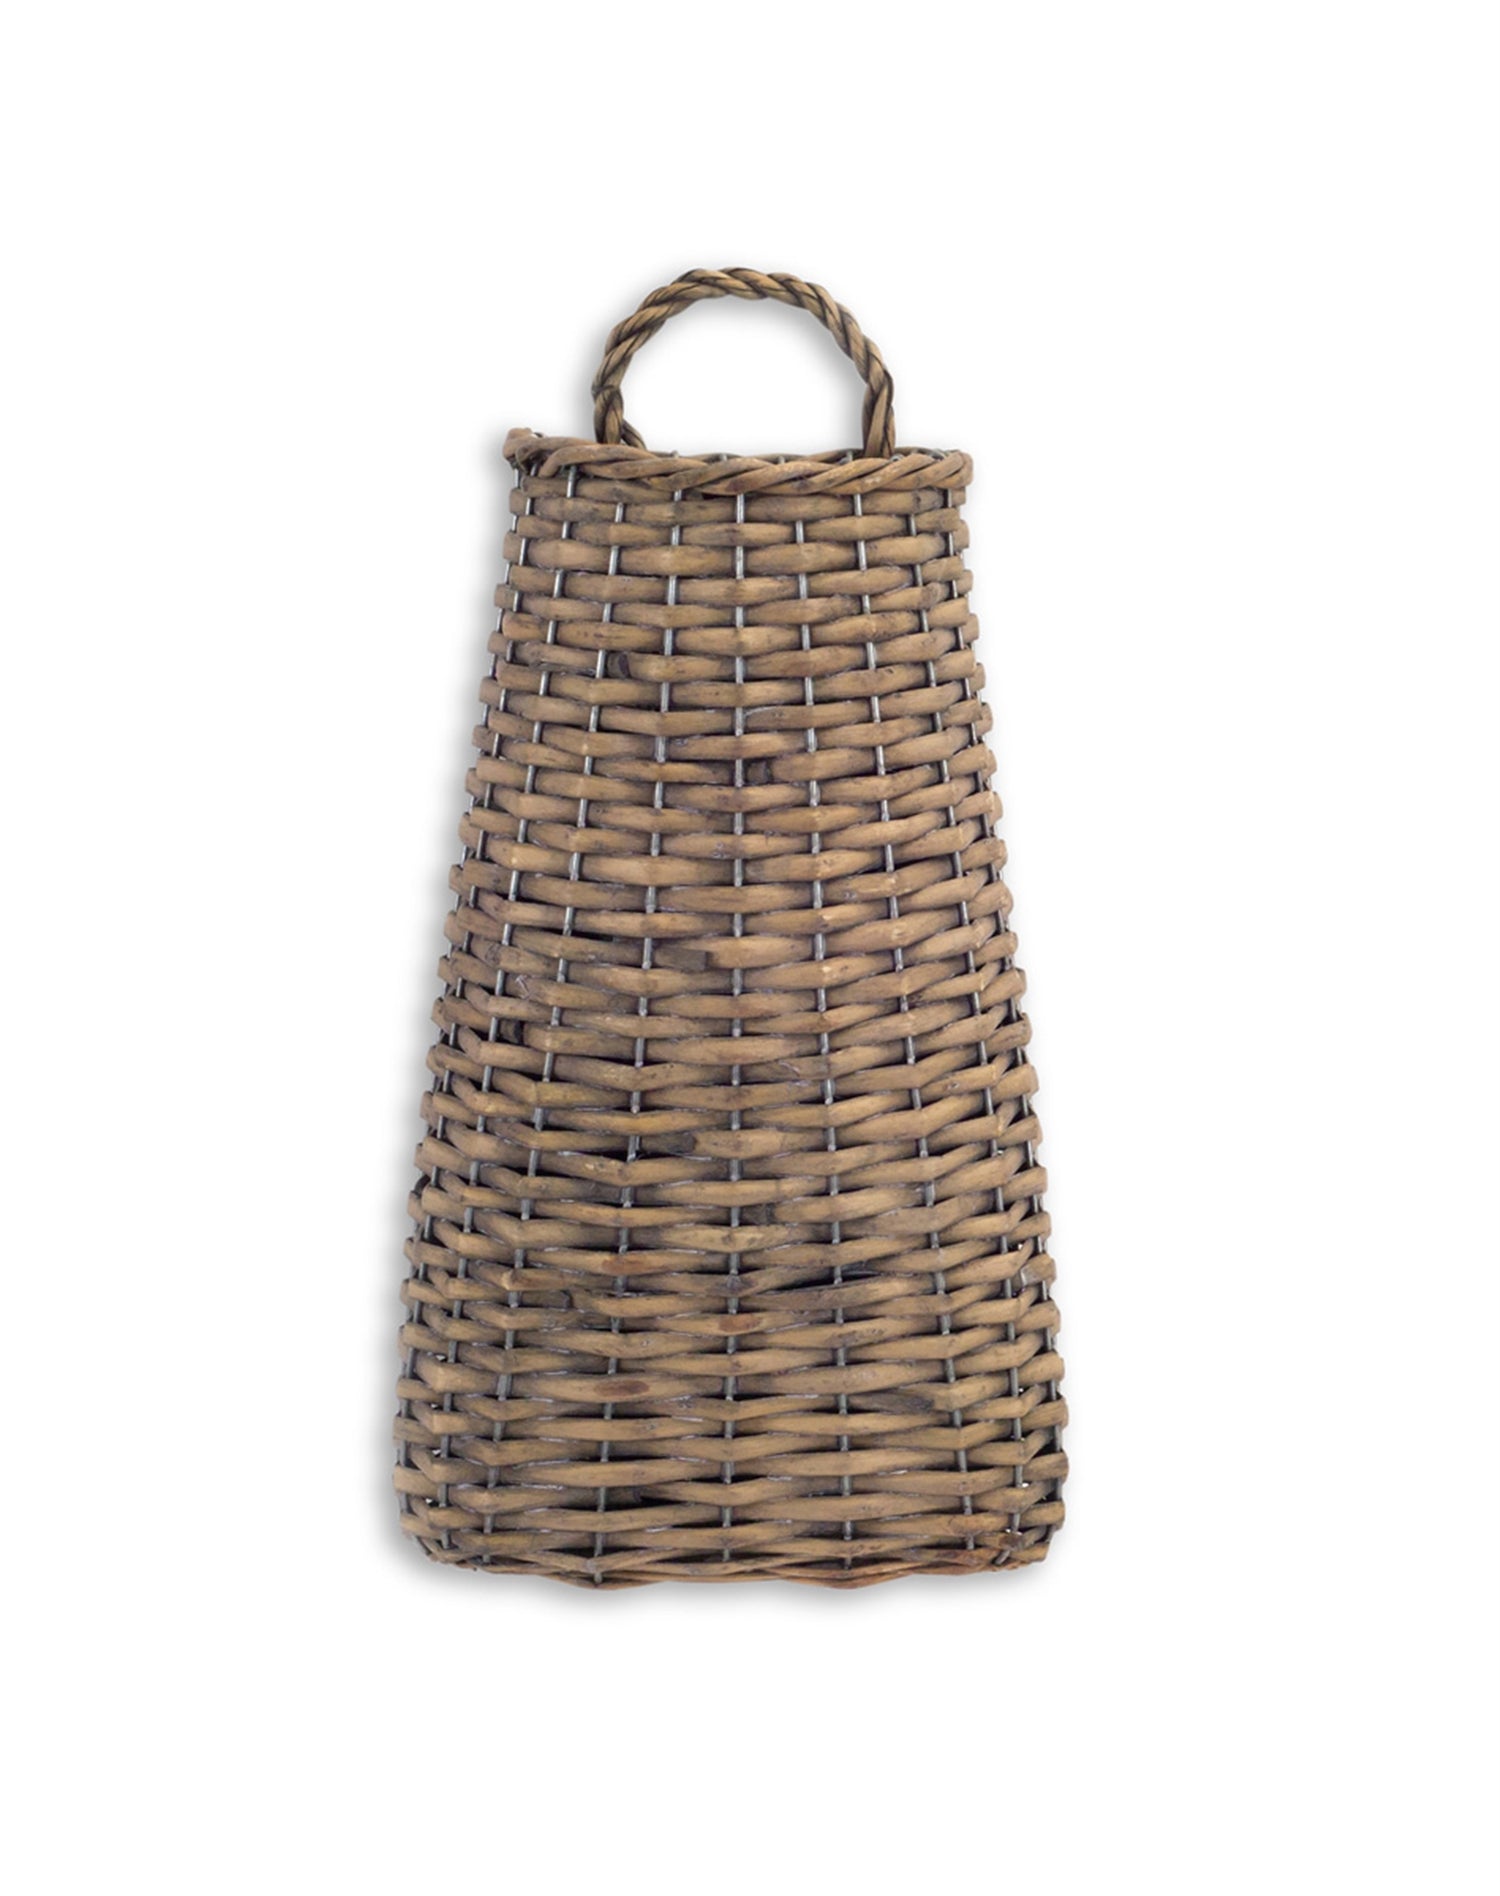 Willow Wall Basket 14"